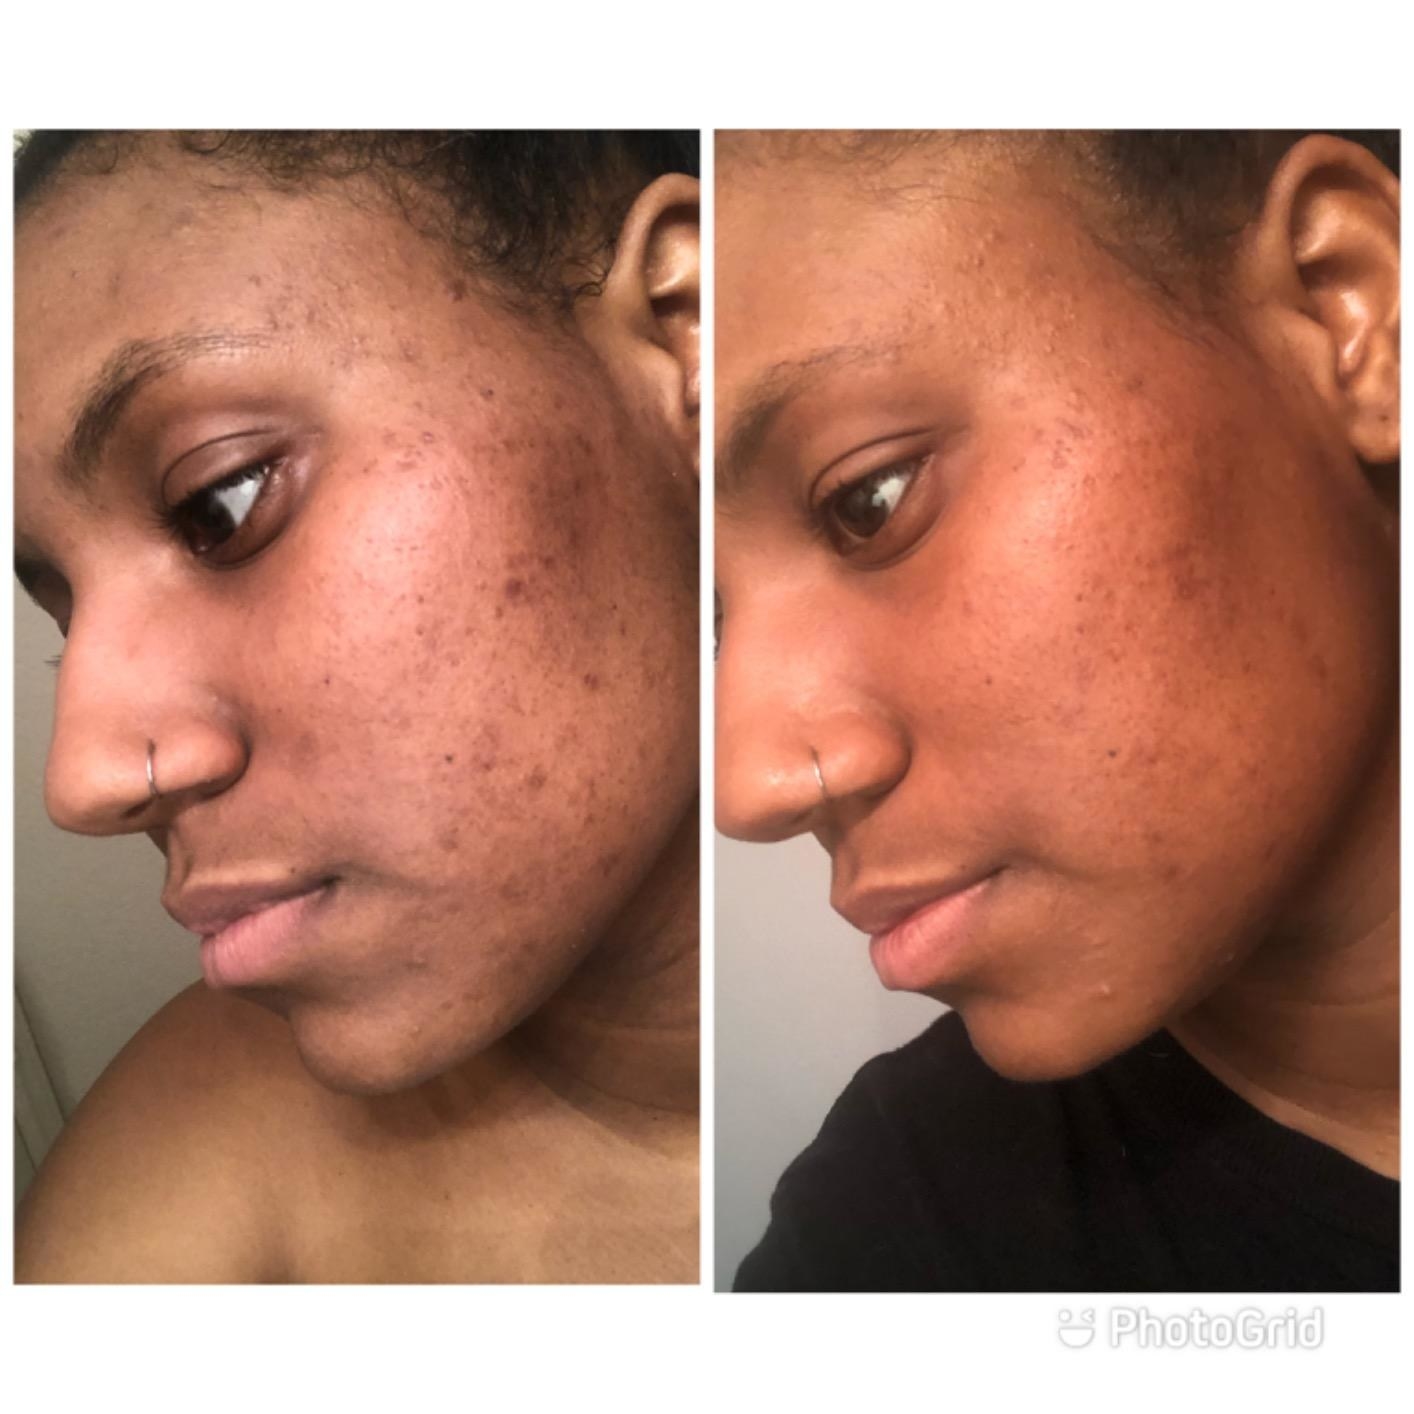 A reviewer&#x27;s skin before and after use, with reduced texture, acne, and redness after